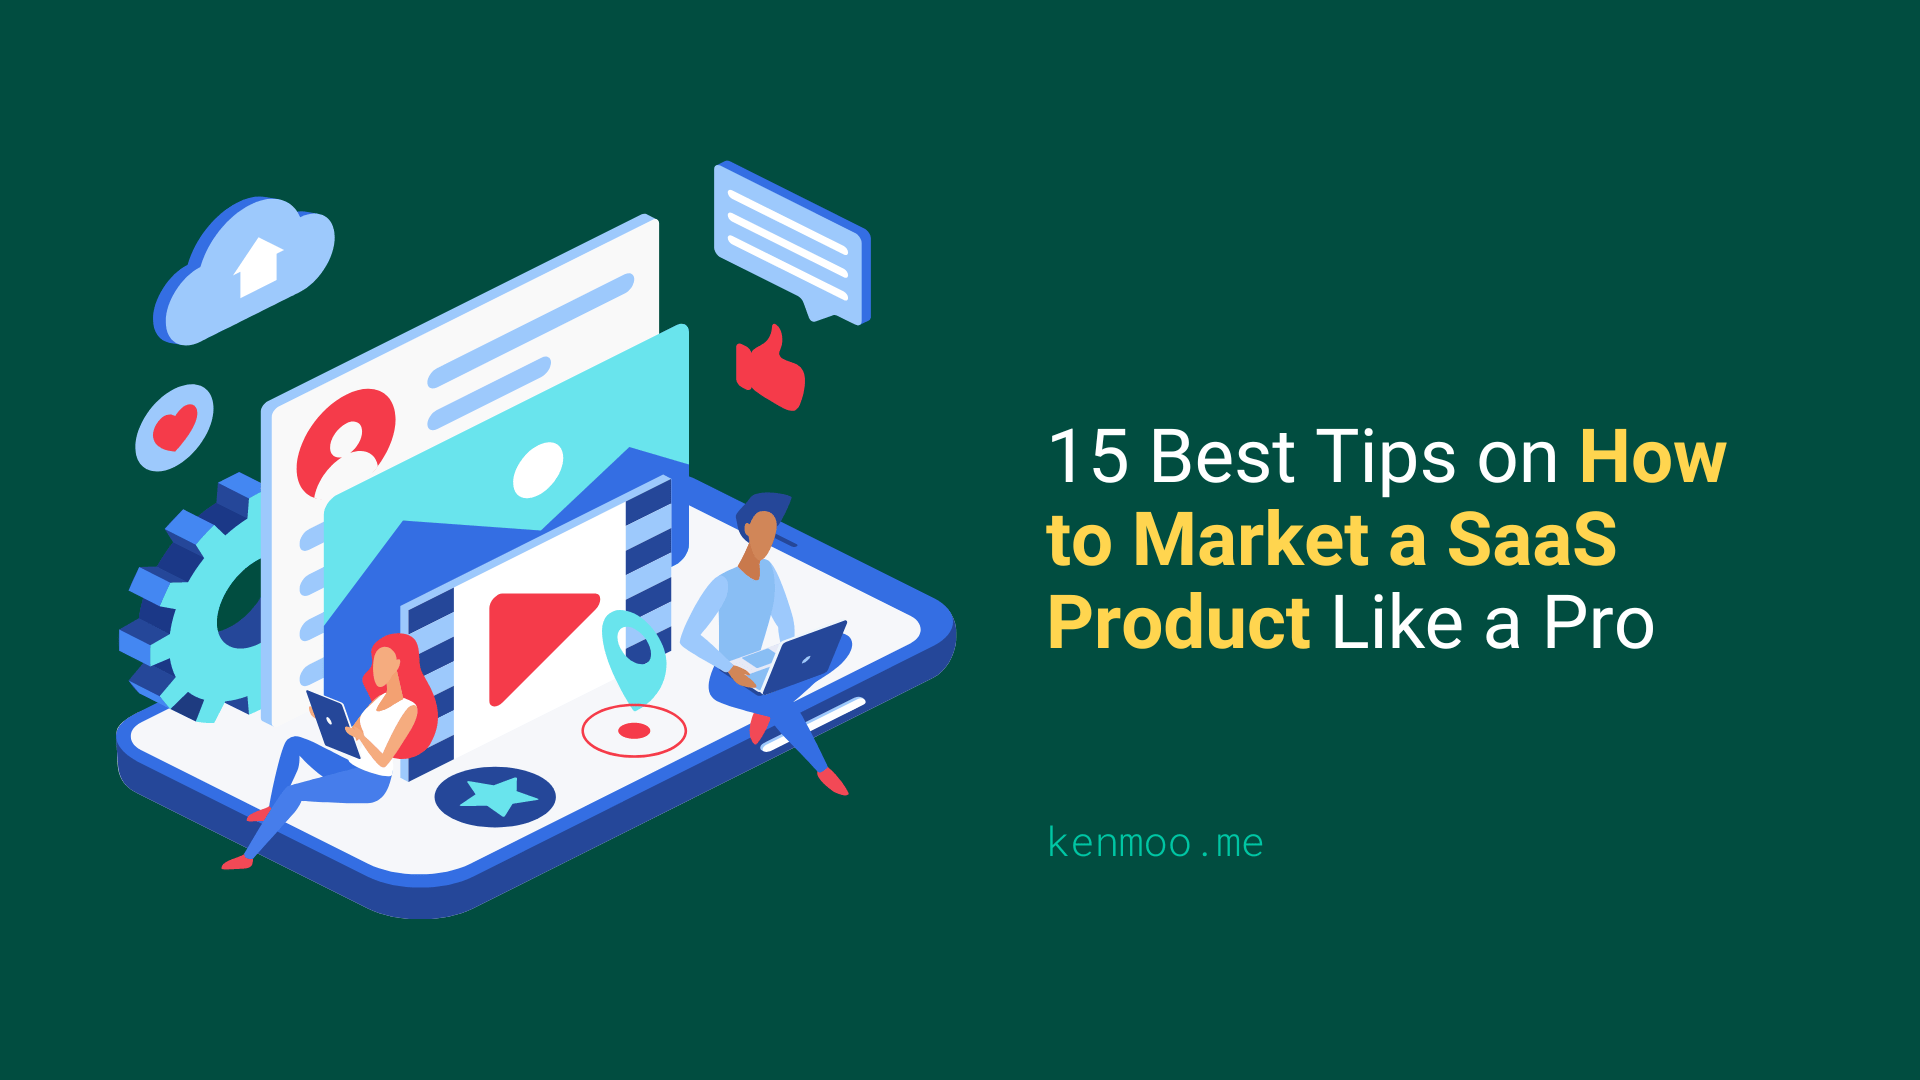 15 Best Tips on How to Market a SaaS Product Like a Pro